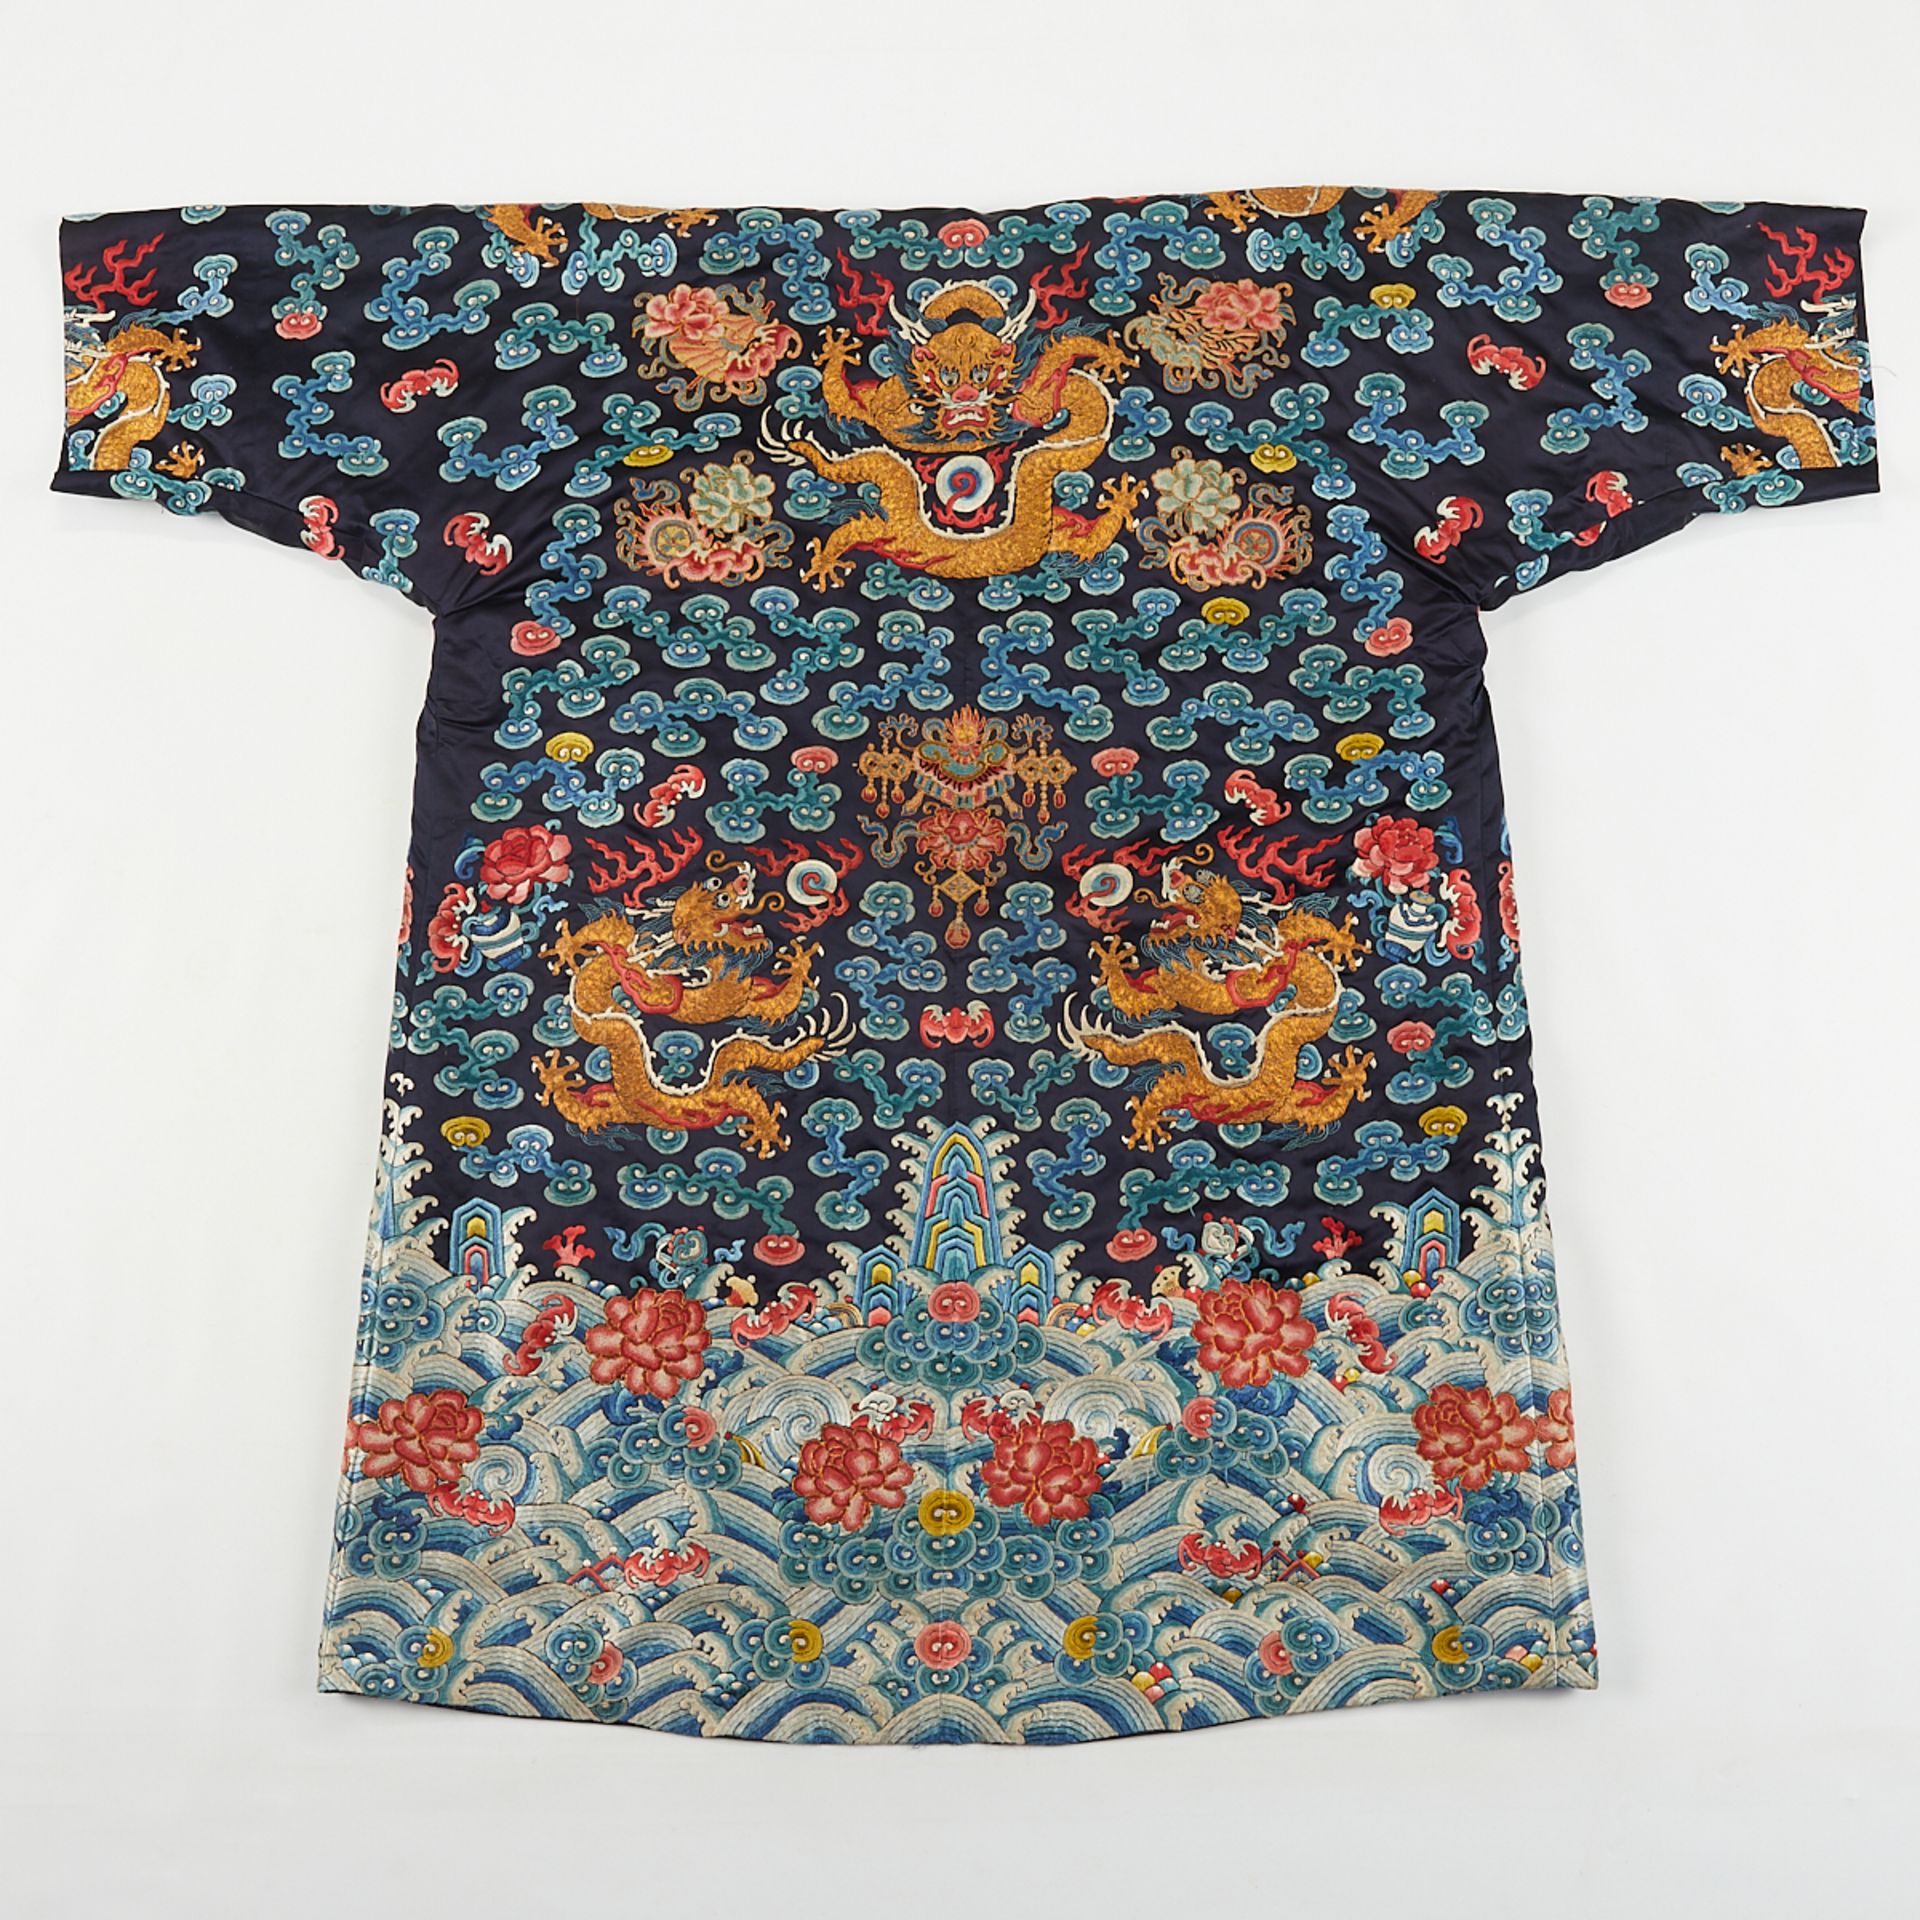 19th c. Chinese Embroidered Silk Dragon Robe - Image 3 of 9